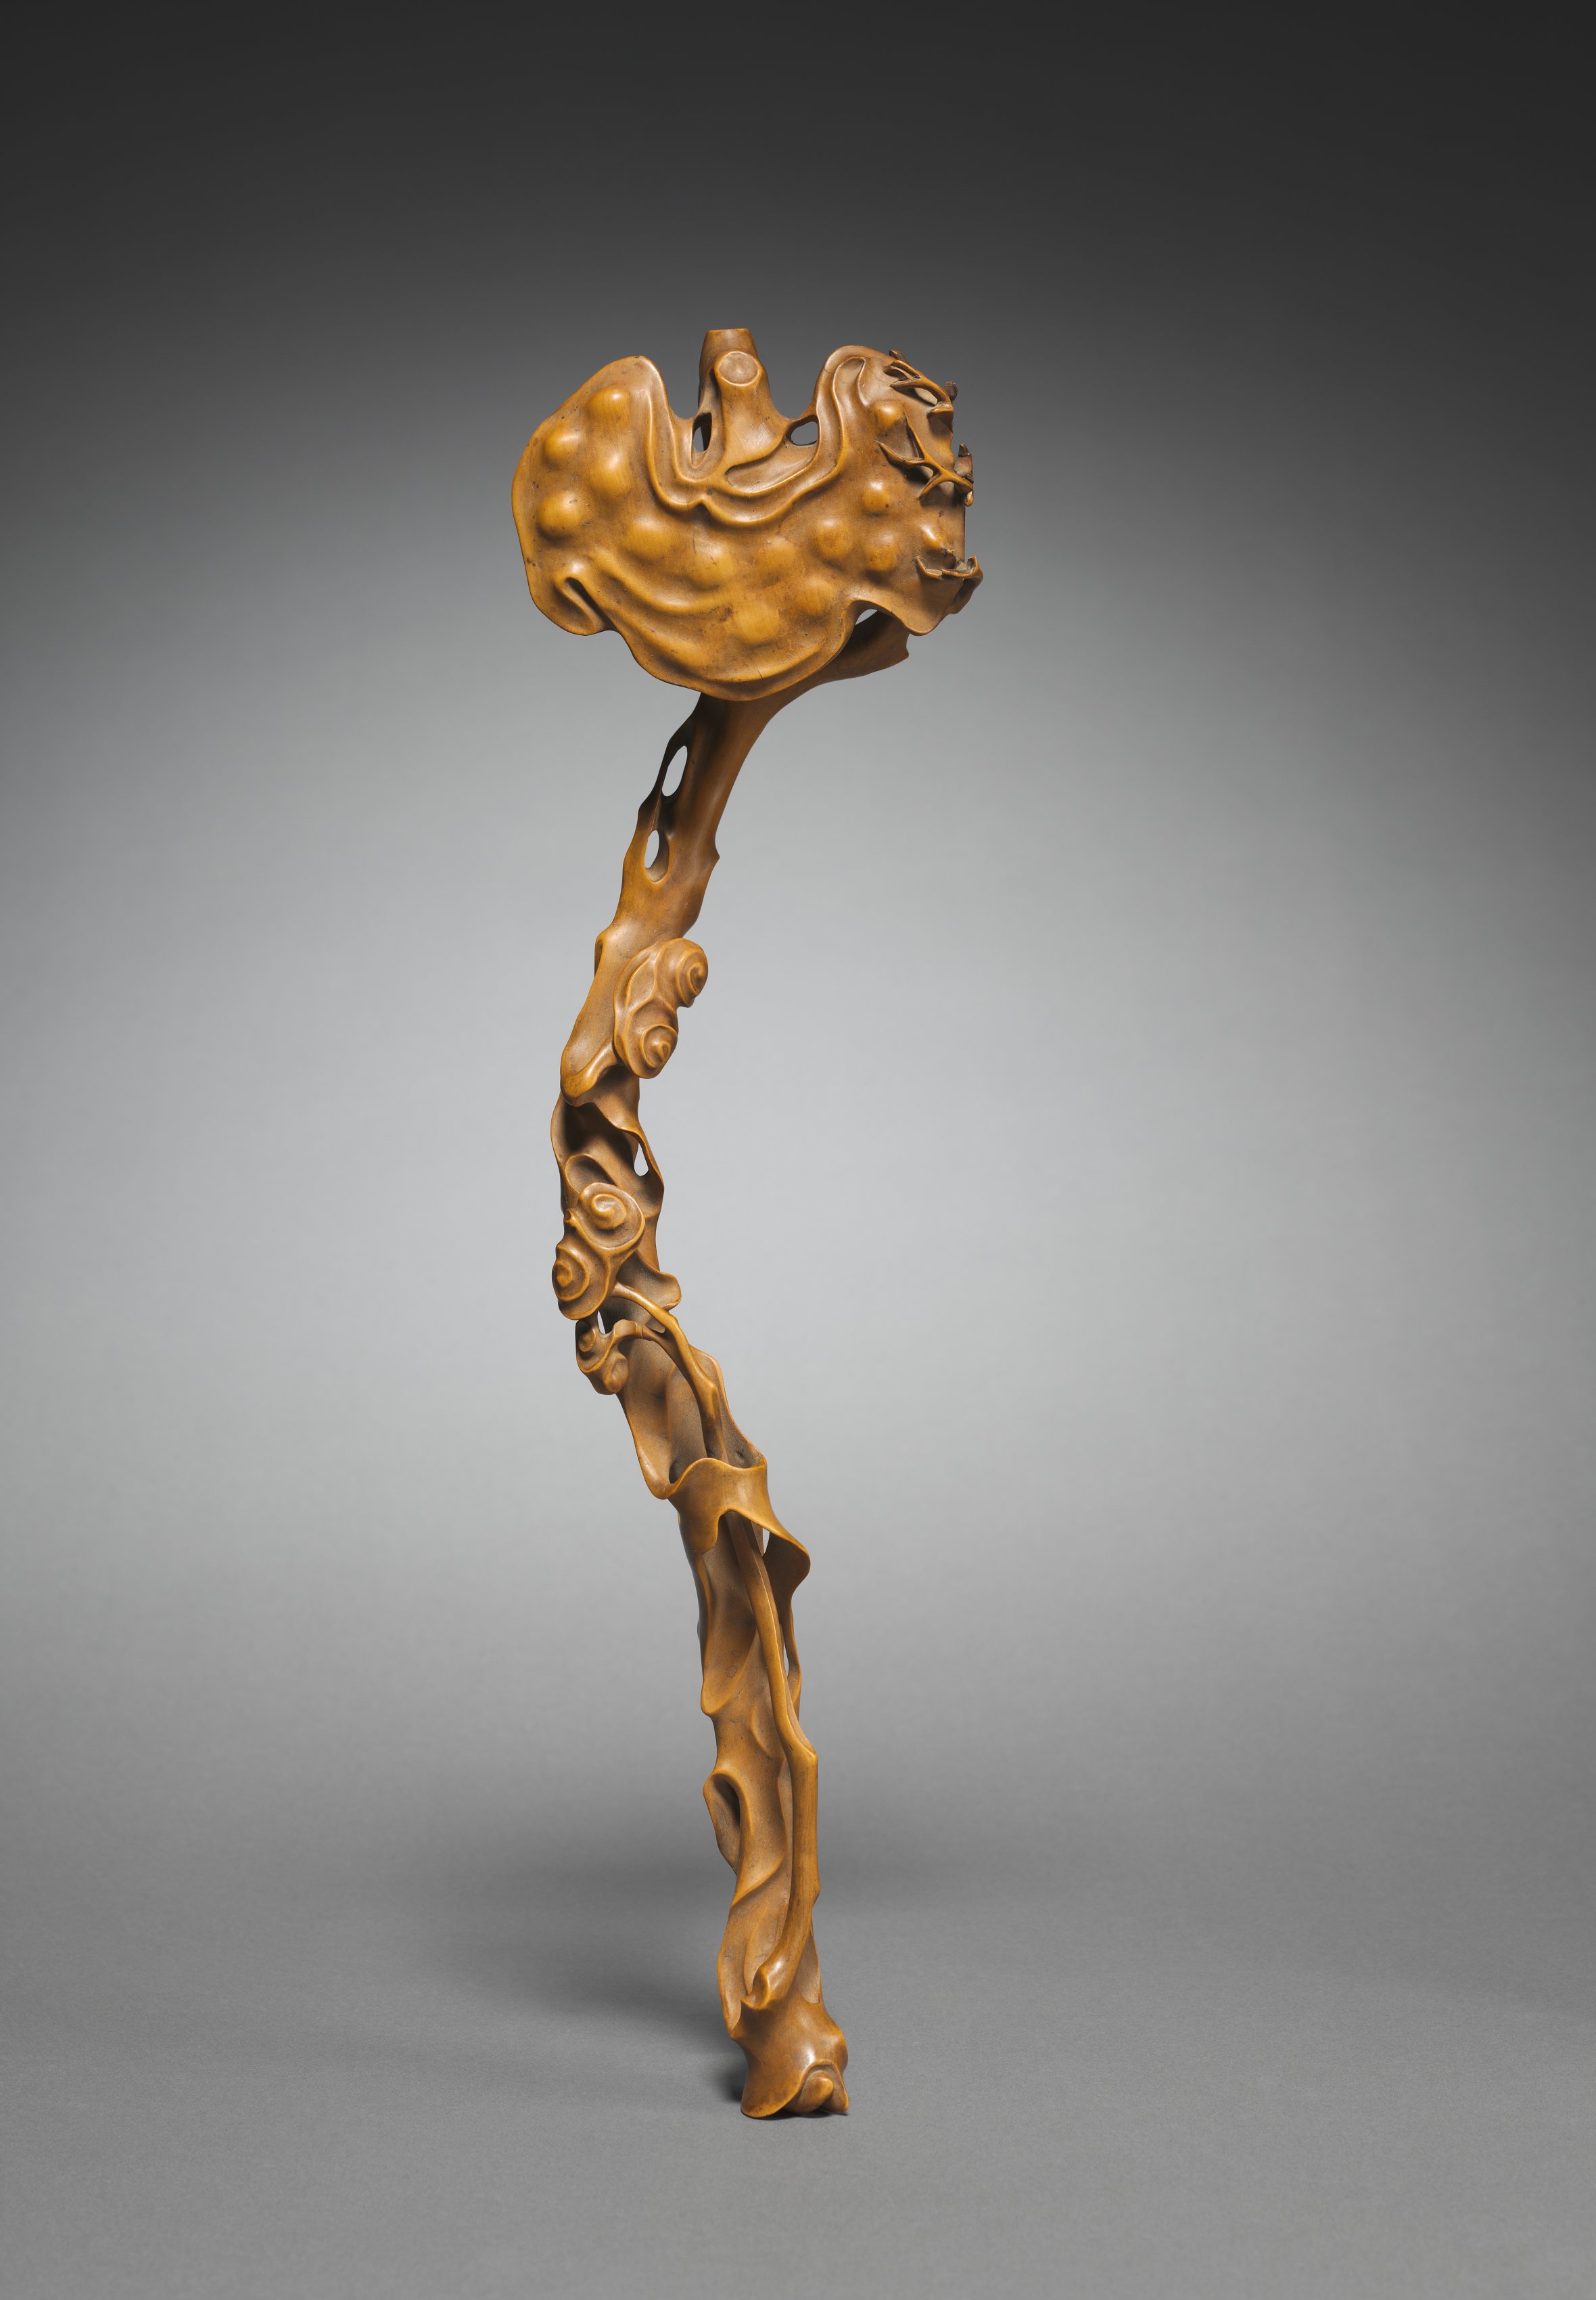 Scepter in the Shape of a Ruyi Fungus